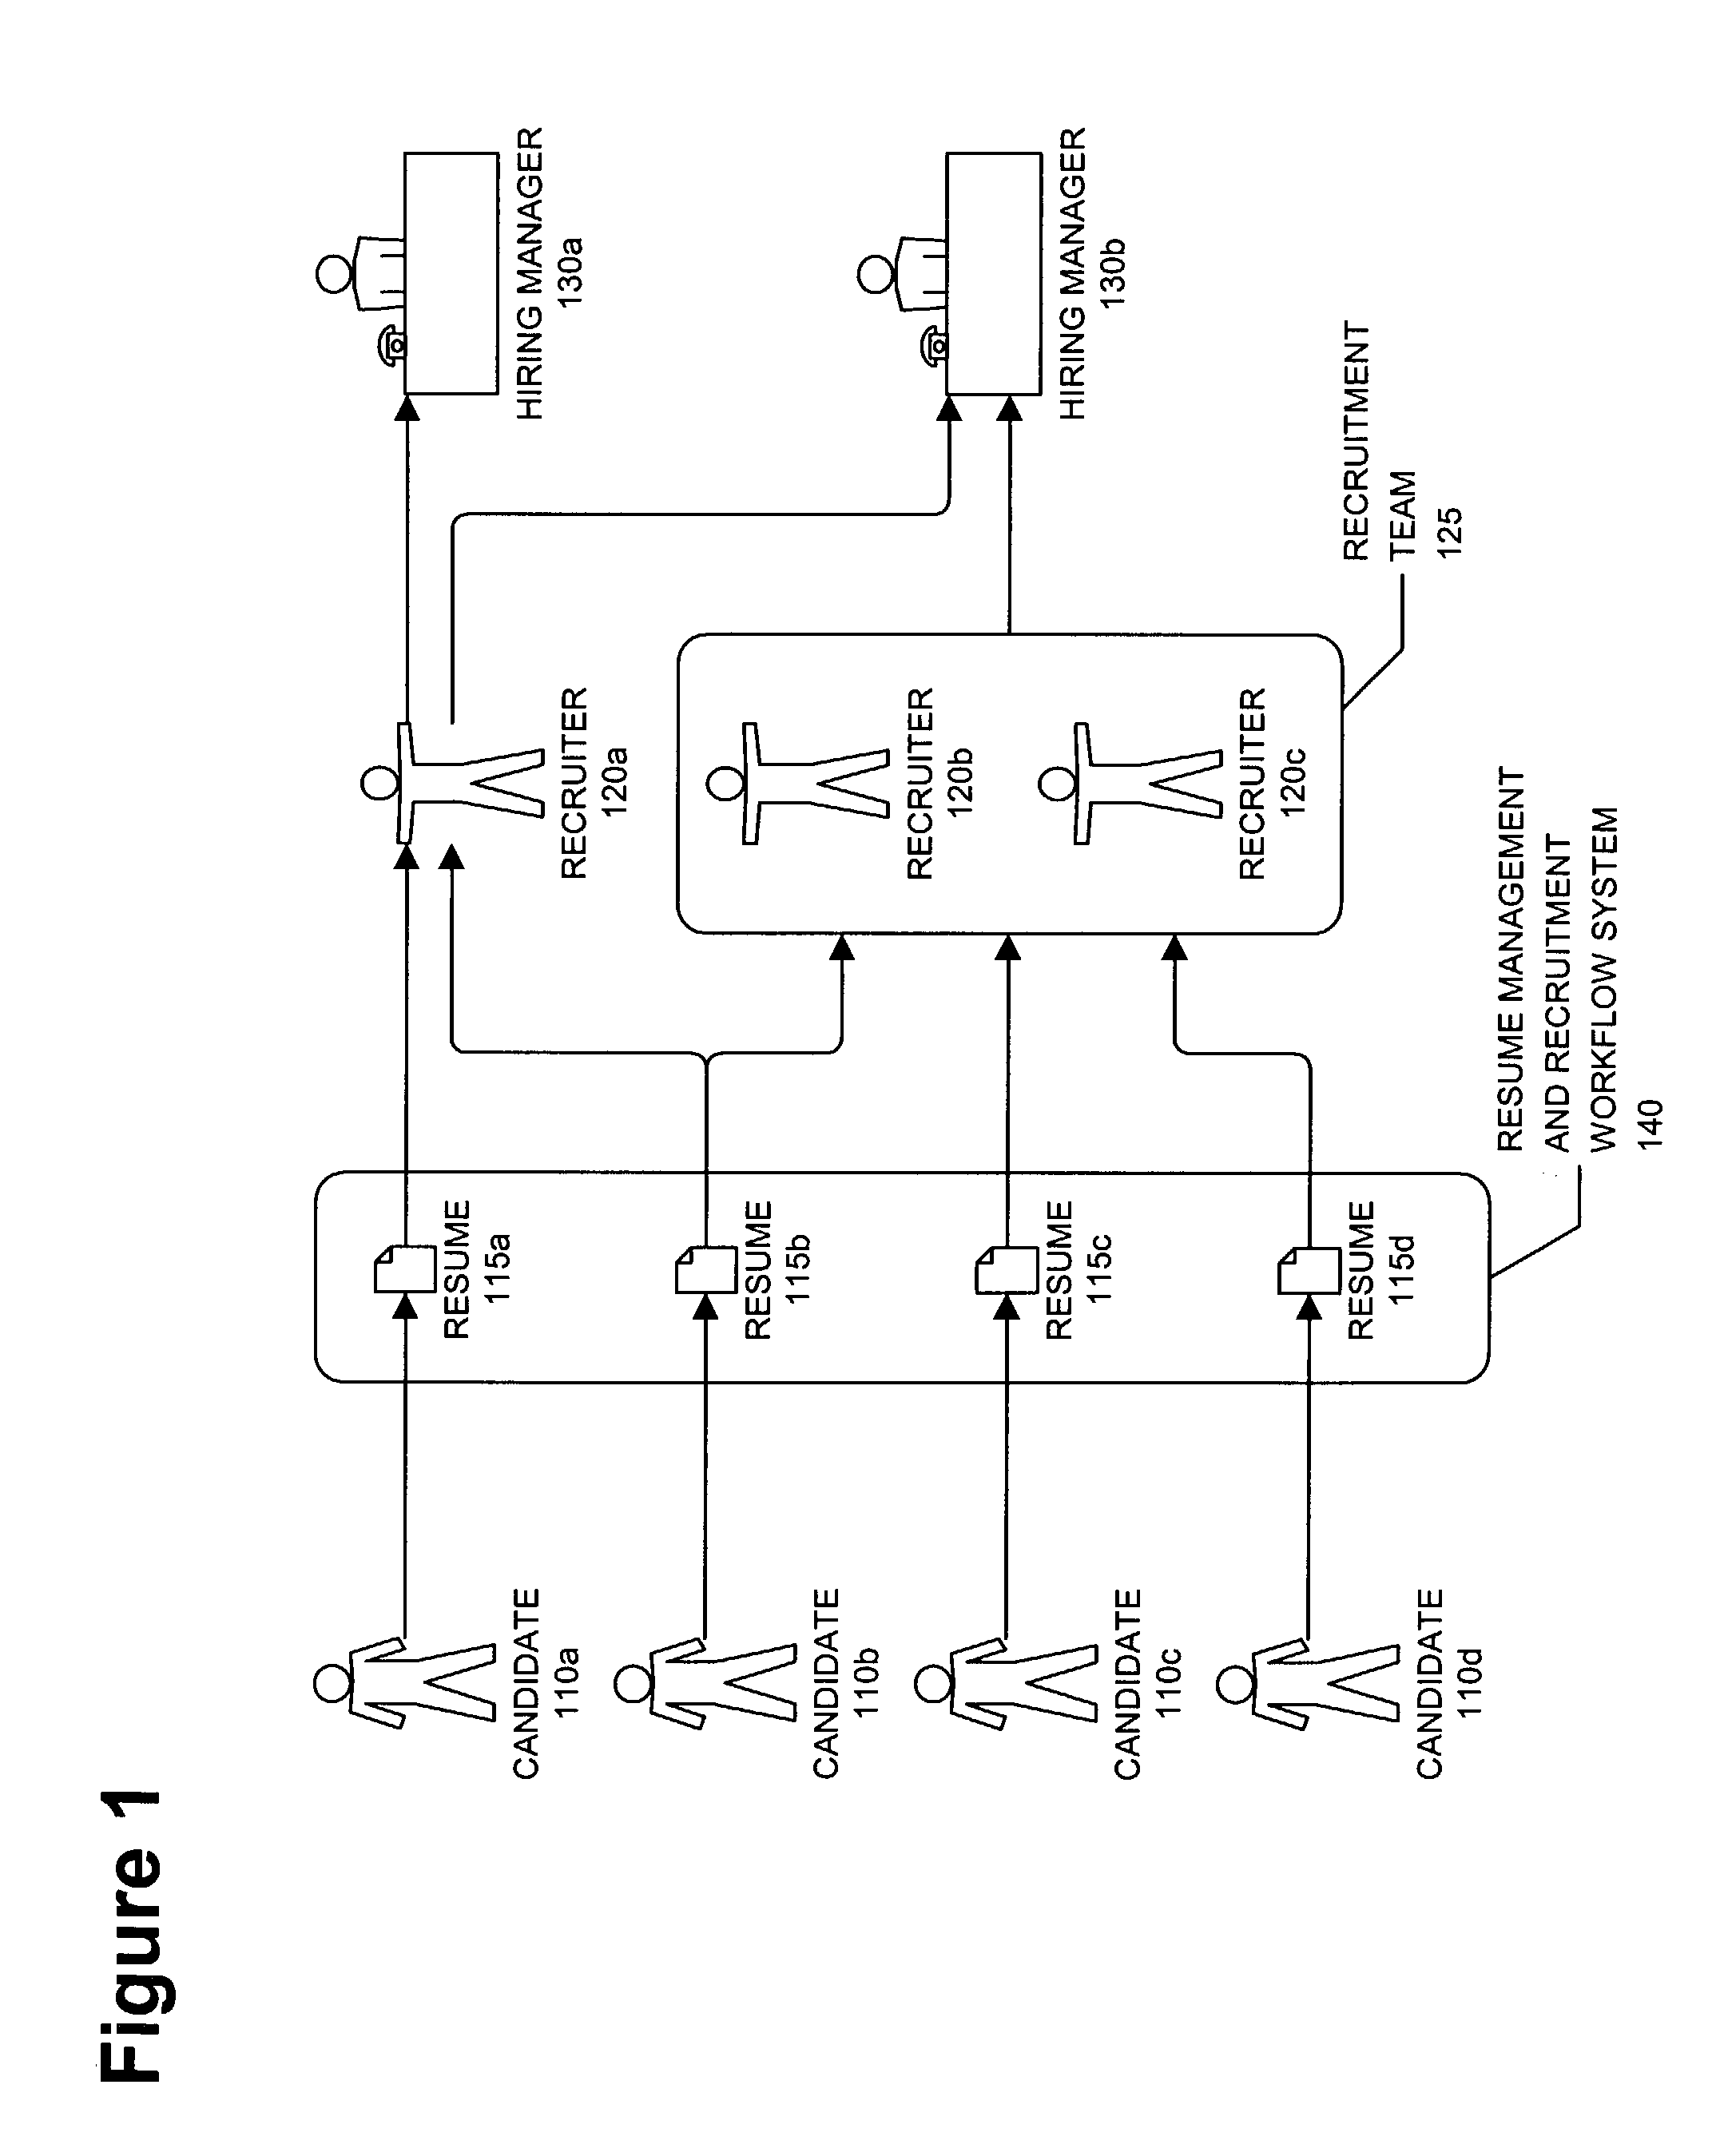 Resume management and recruitment workflow system and method